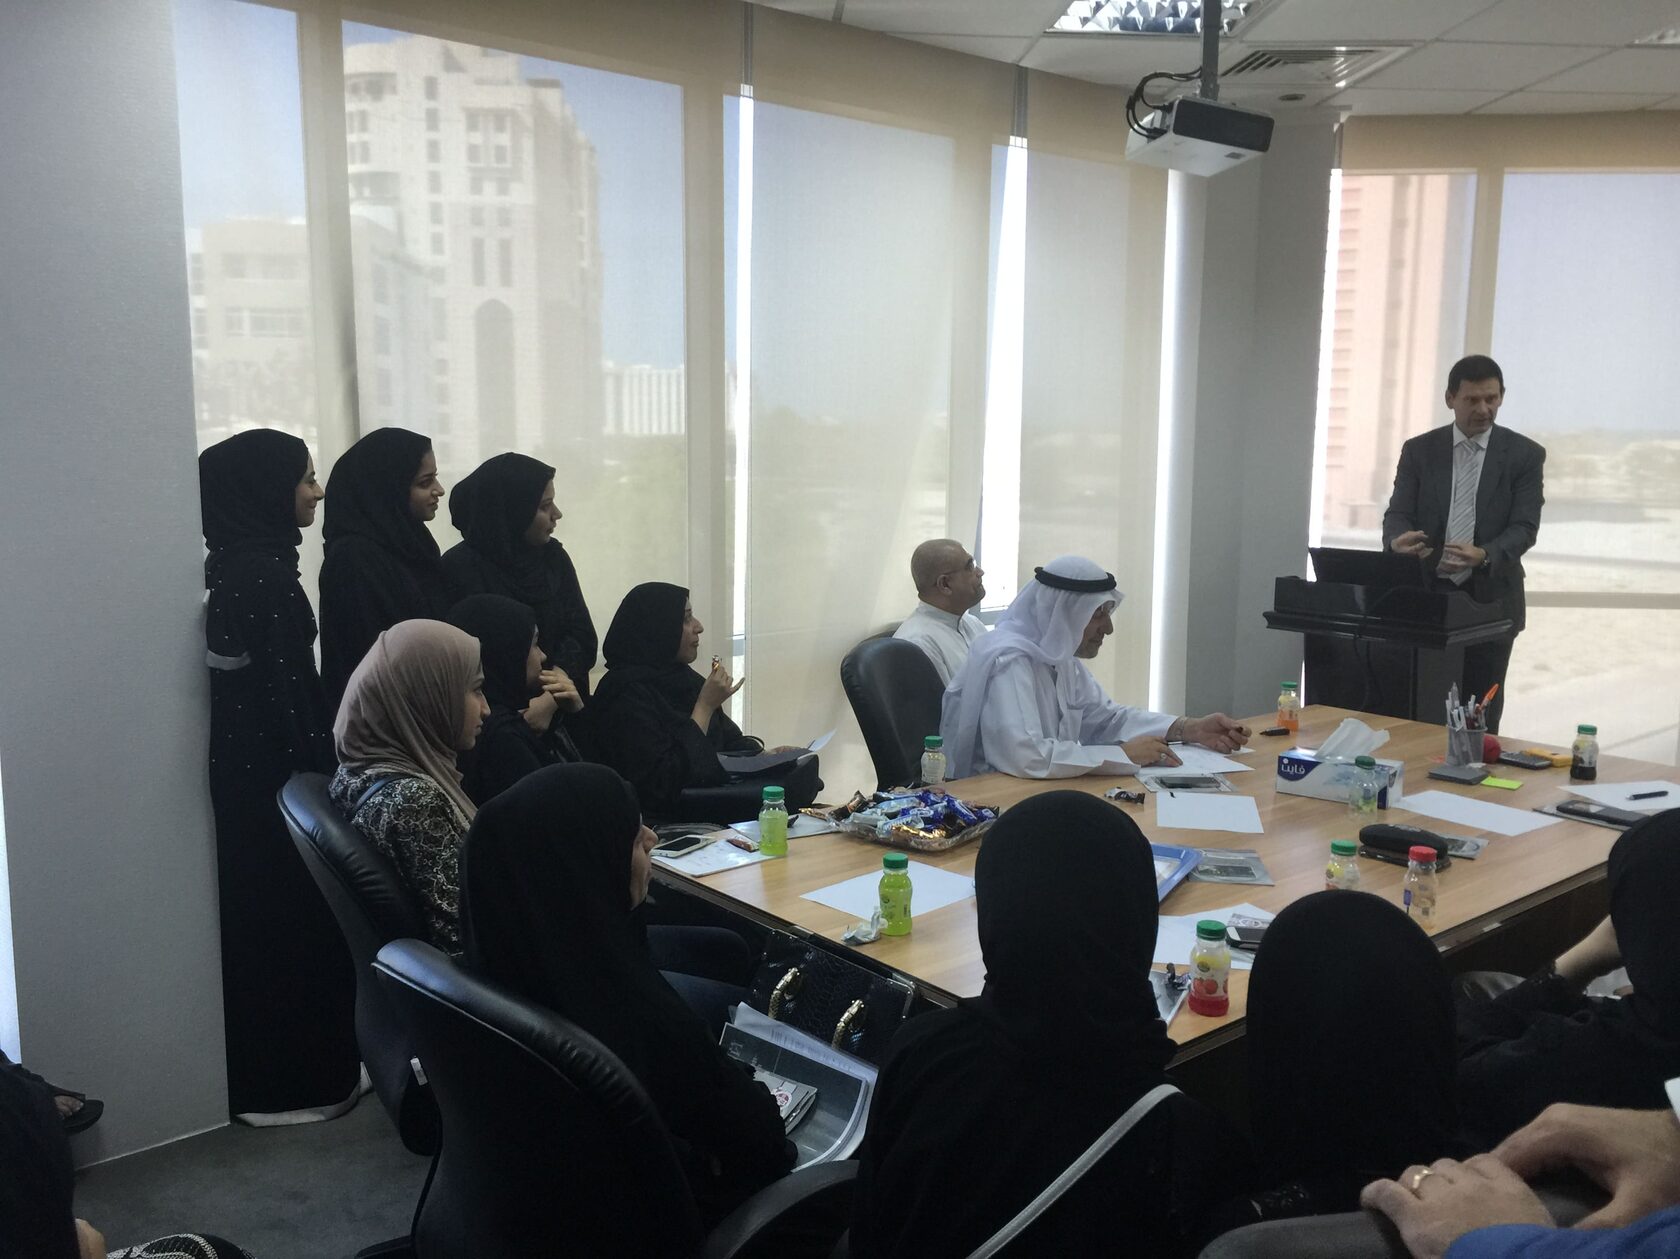 Conference with applicants in Bahrain